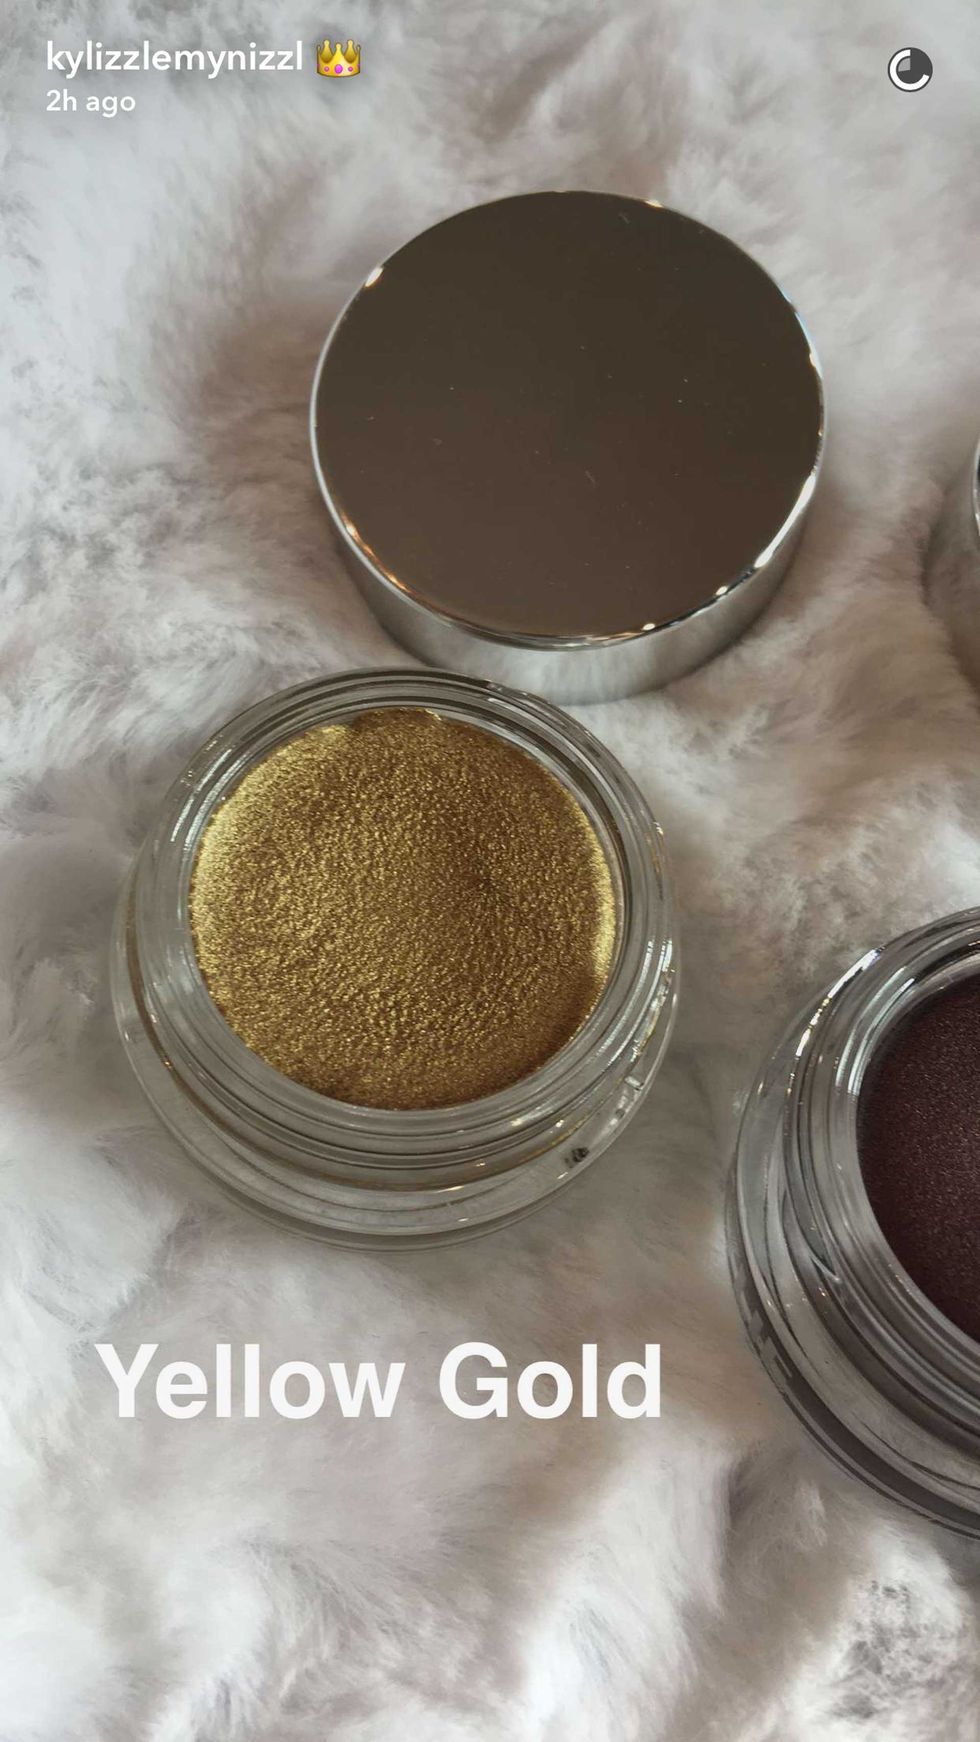 Brown, Ingredient, Photography, Glitter, Powder, Silver, Chemical compound, Home accessories, Celery salt, Spice, 